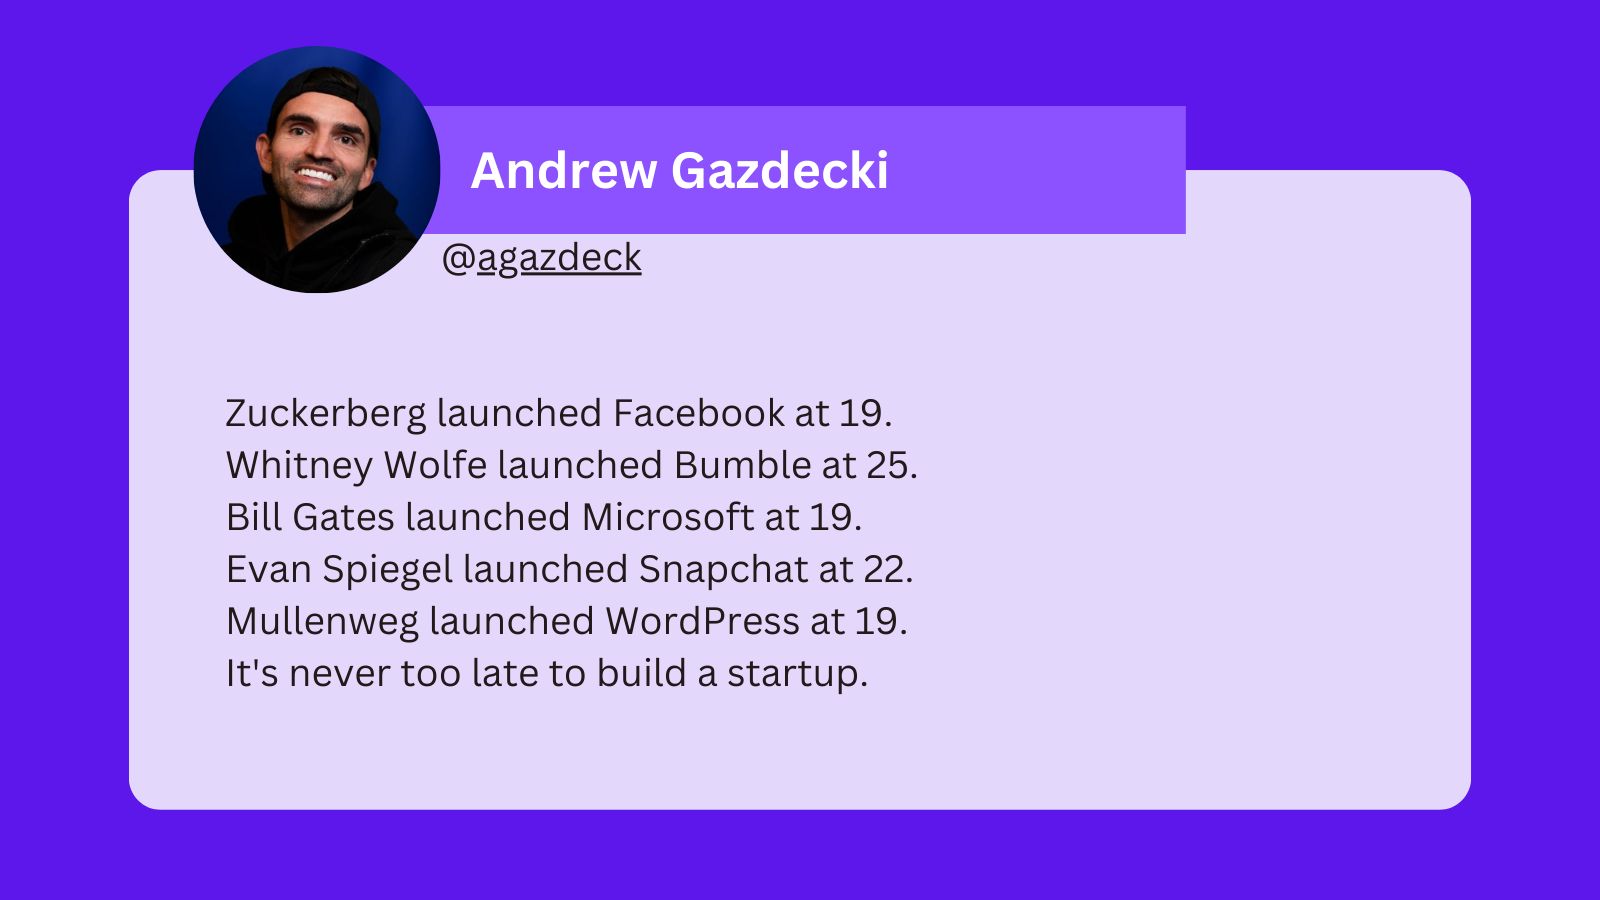 A tweet that reads: Zuckerberg launched Facebook at 19. Whitney Wolfe launched Bumble at 25. Bill Gates launched Microsoft at 19. Evan Spiegel launched Snapchat at 22. Mullenweg launched WordPress at 19. It's never too late to build a startup.